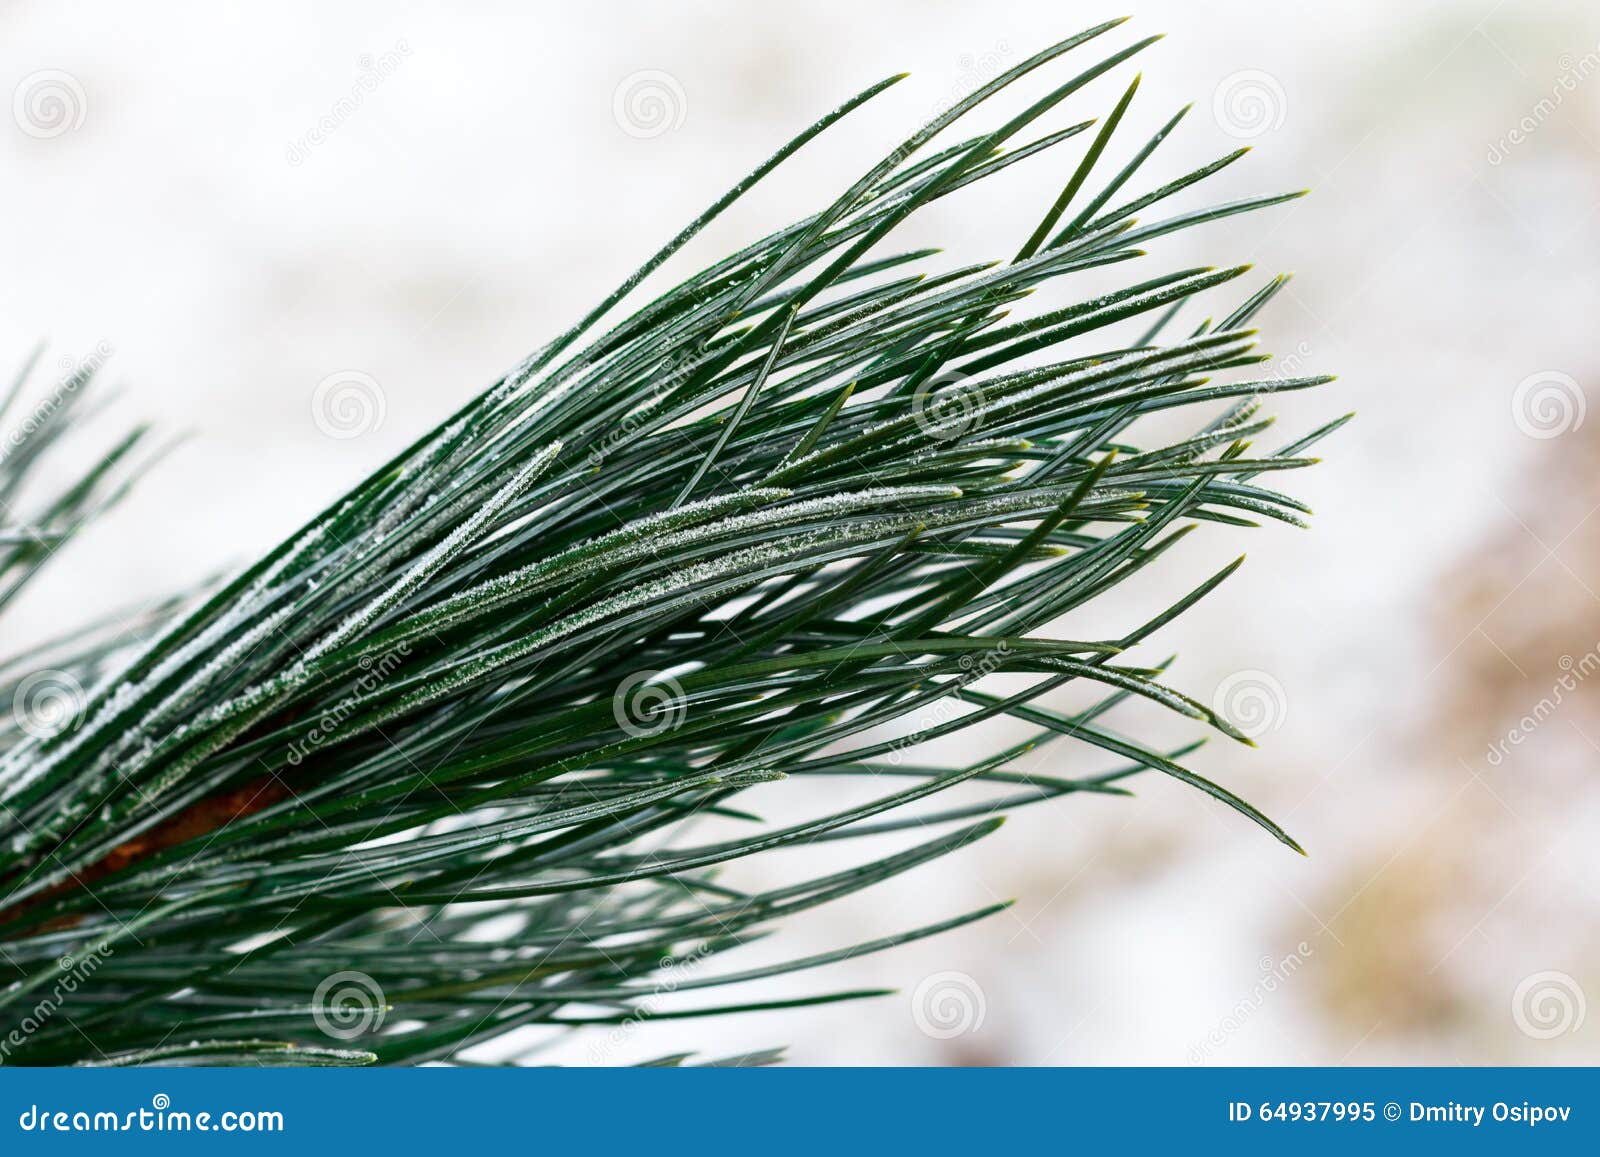 Snow Fir Tree Branches Under Snowfall. Winter Detail Stock Image